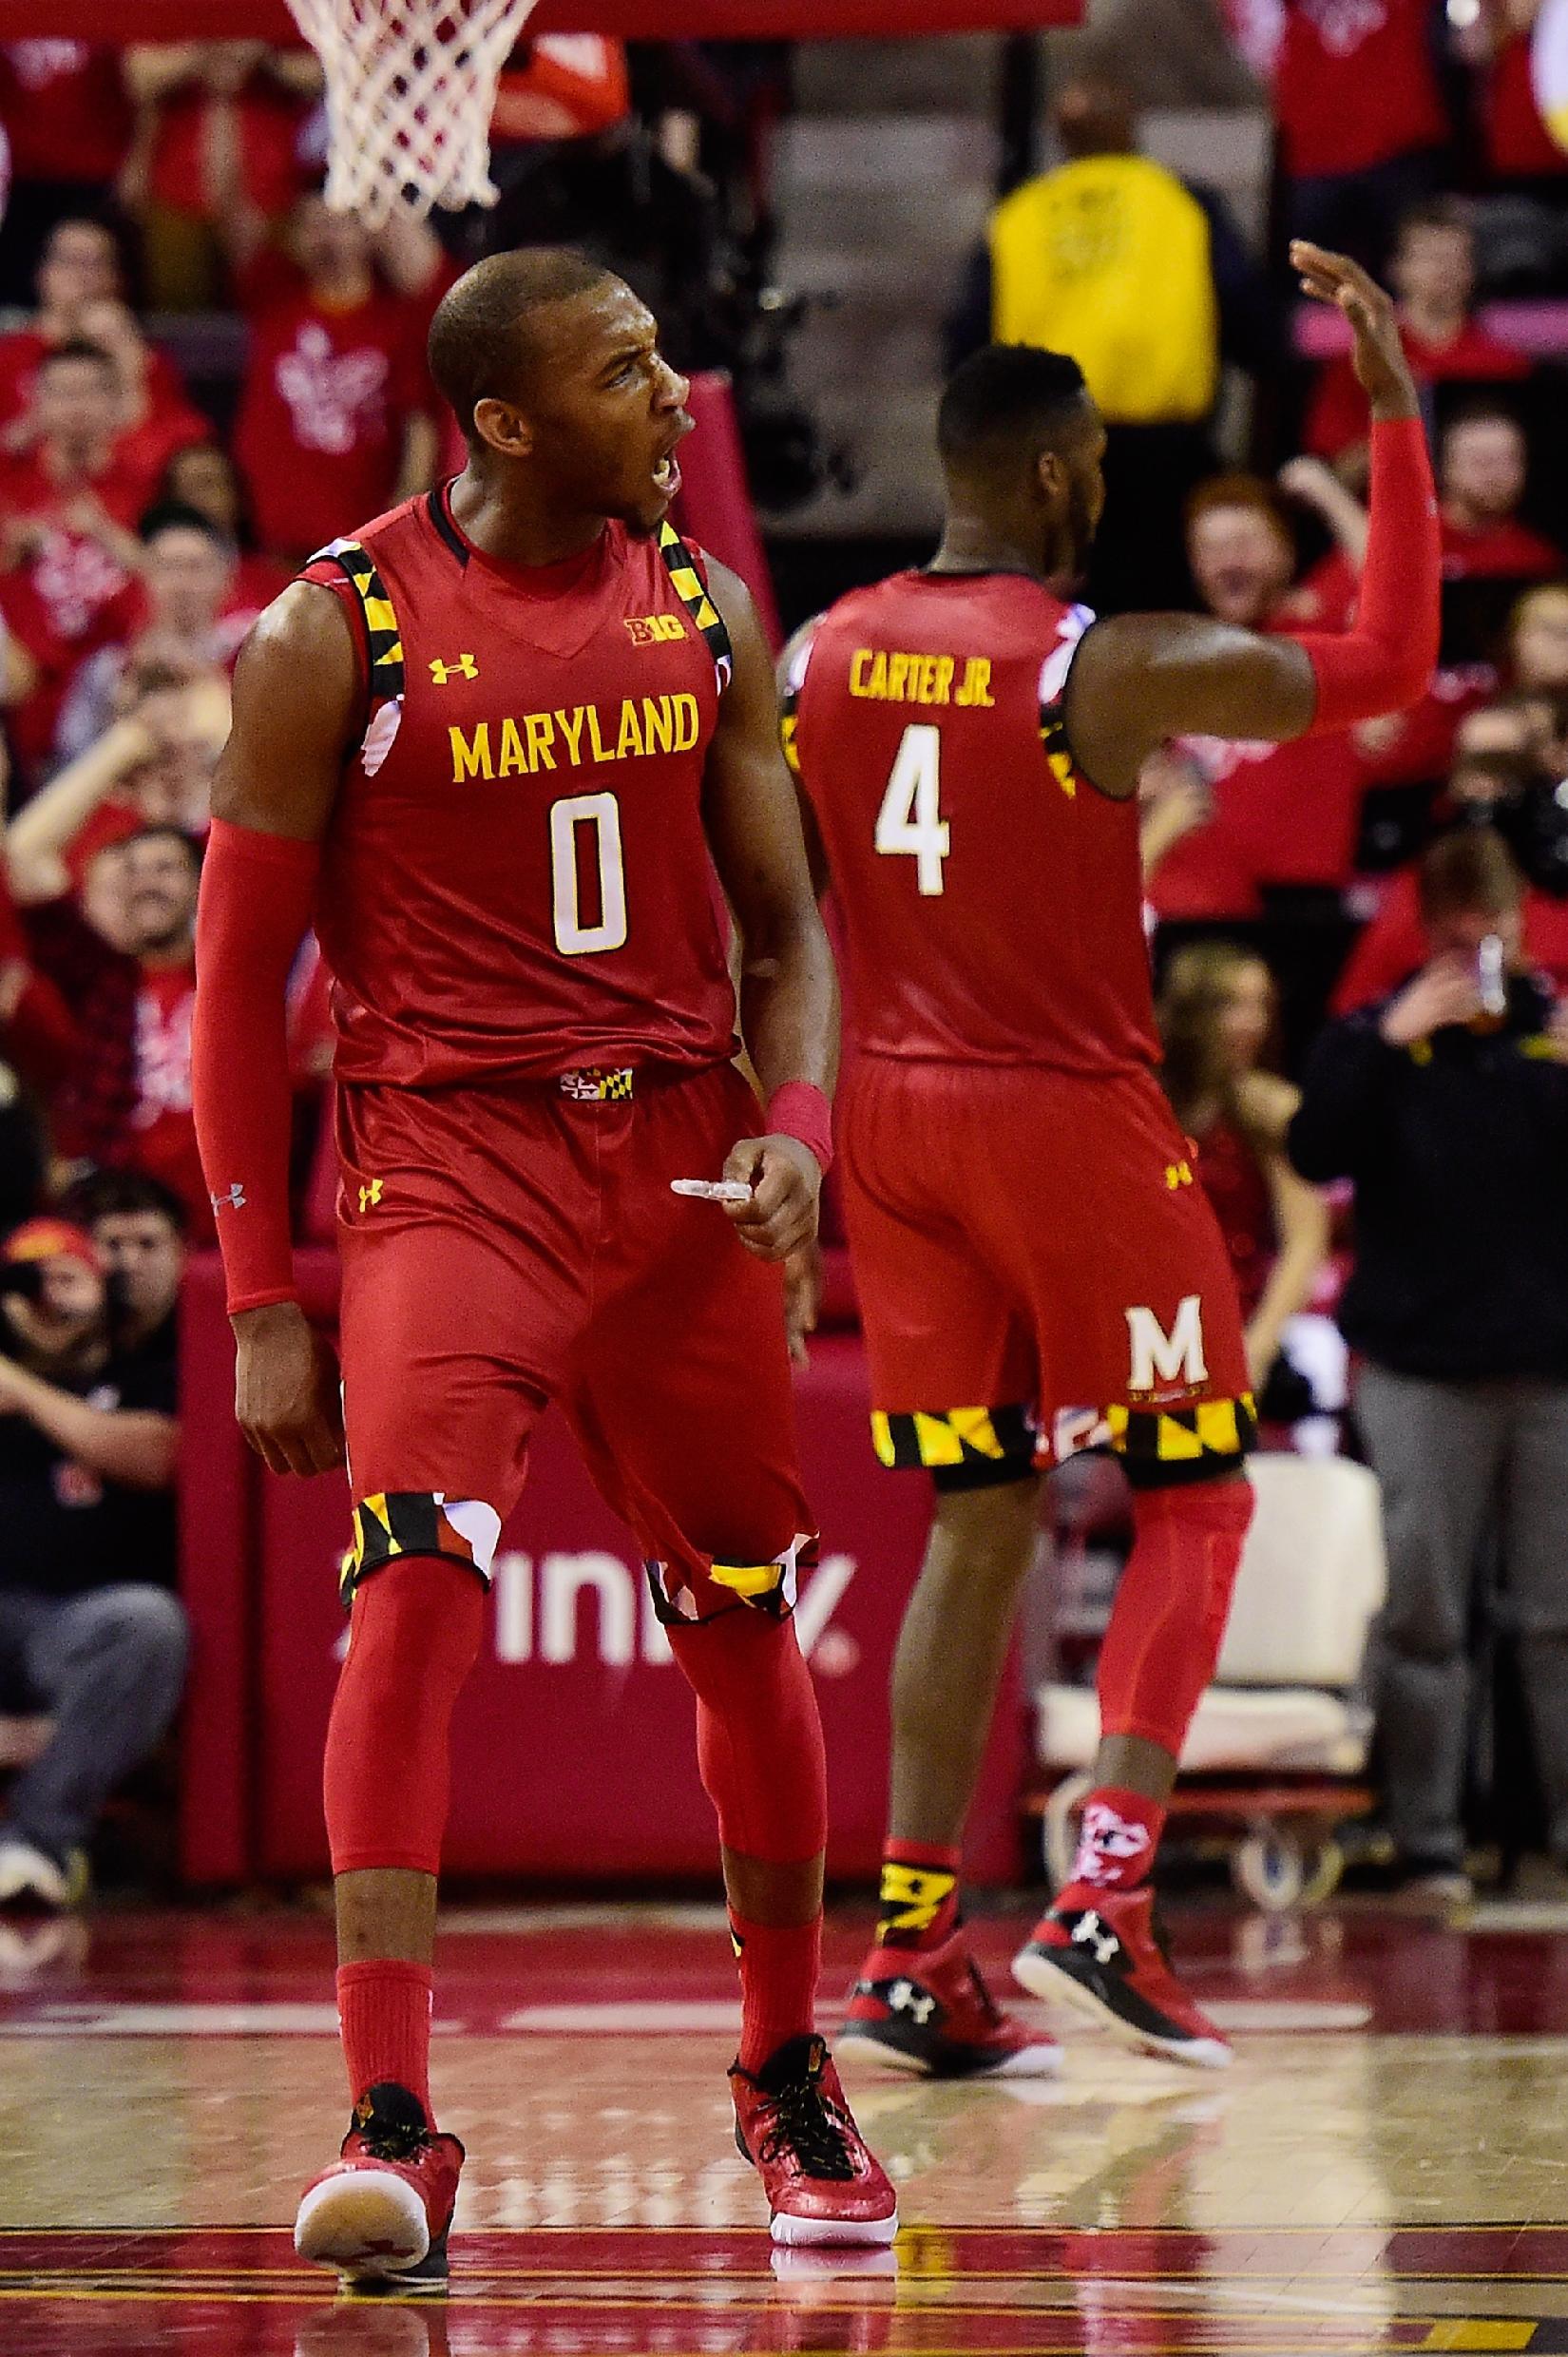 COLLEGE PARK, MD - FEBRUARY 06:  Rasheed Sulaimon #0 of the Maryland Terrapins reacts after a play in the second half against Purdue. (Photo by Patrick McDermott/Getty Images)